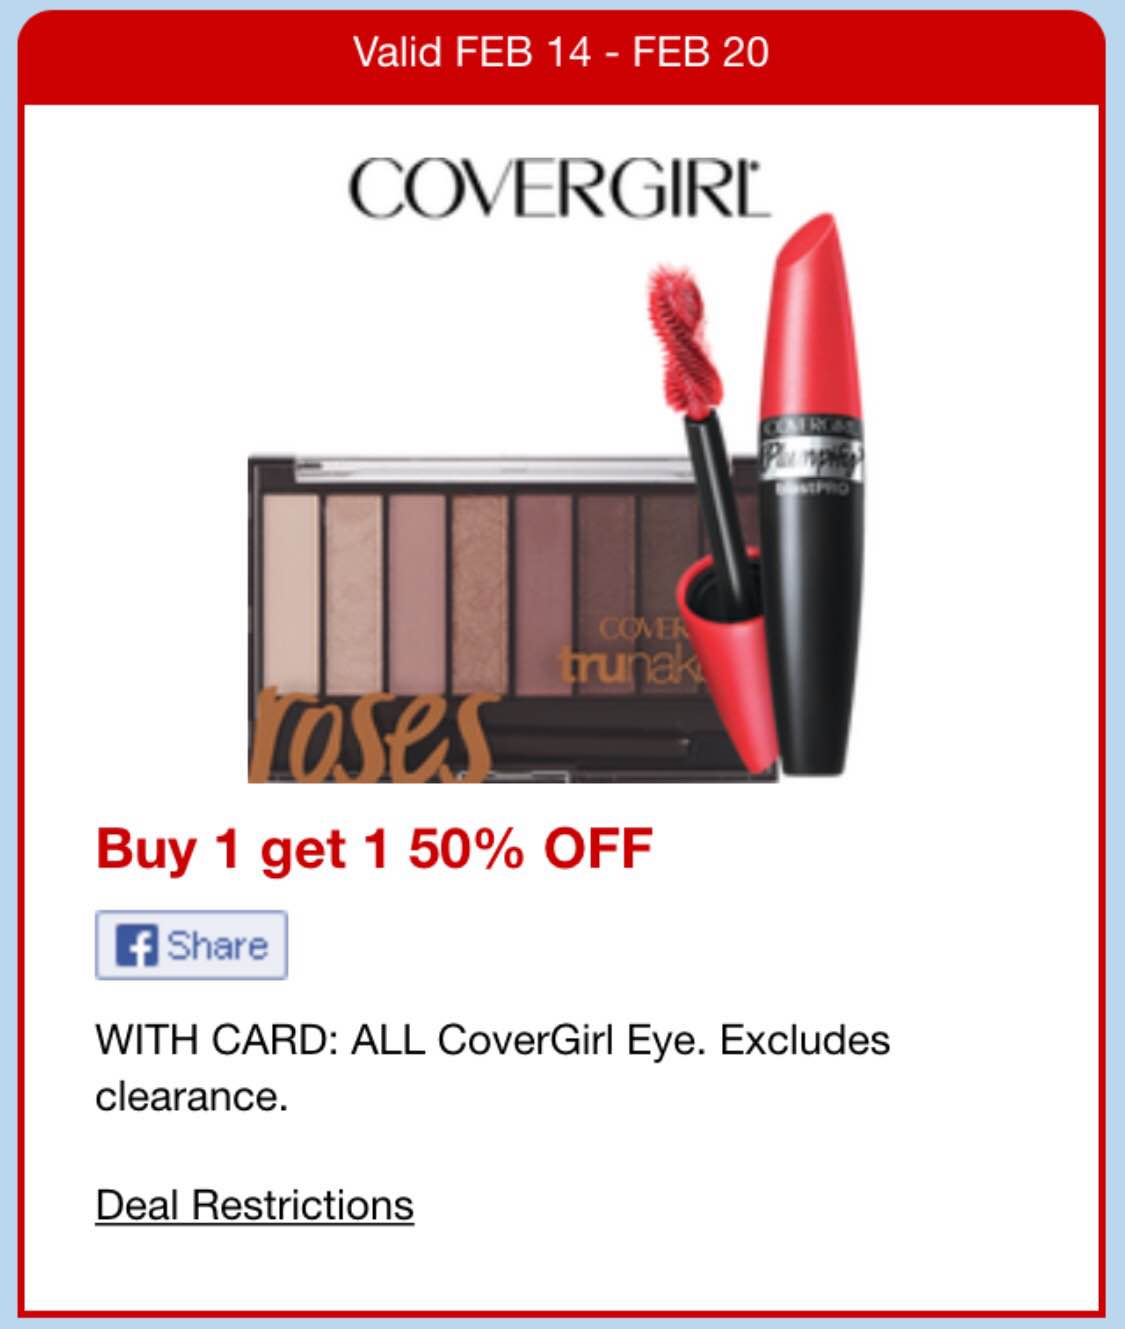 Swatch That: CVS Beauty Deals Valid from February 14- 20, 2016